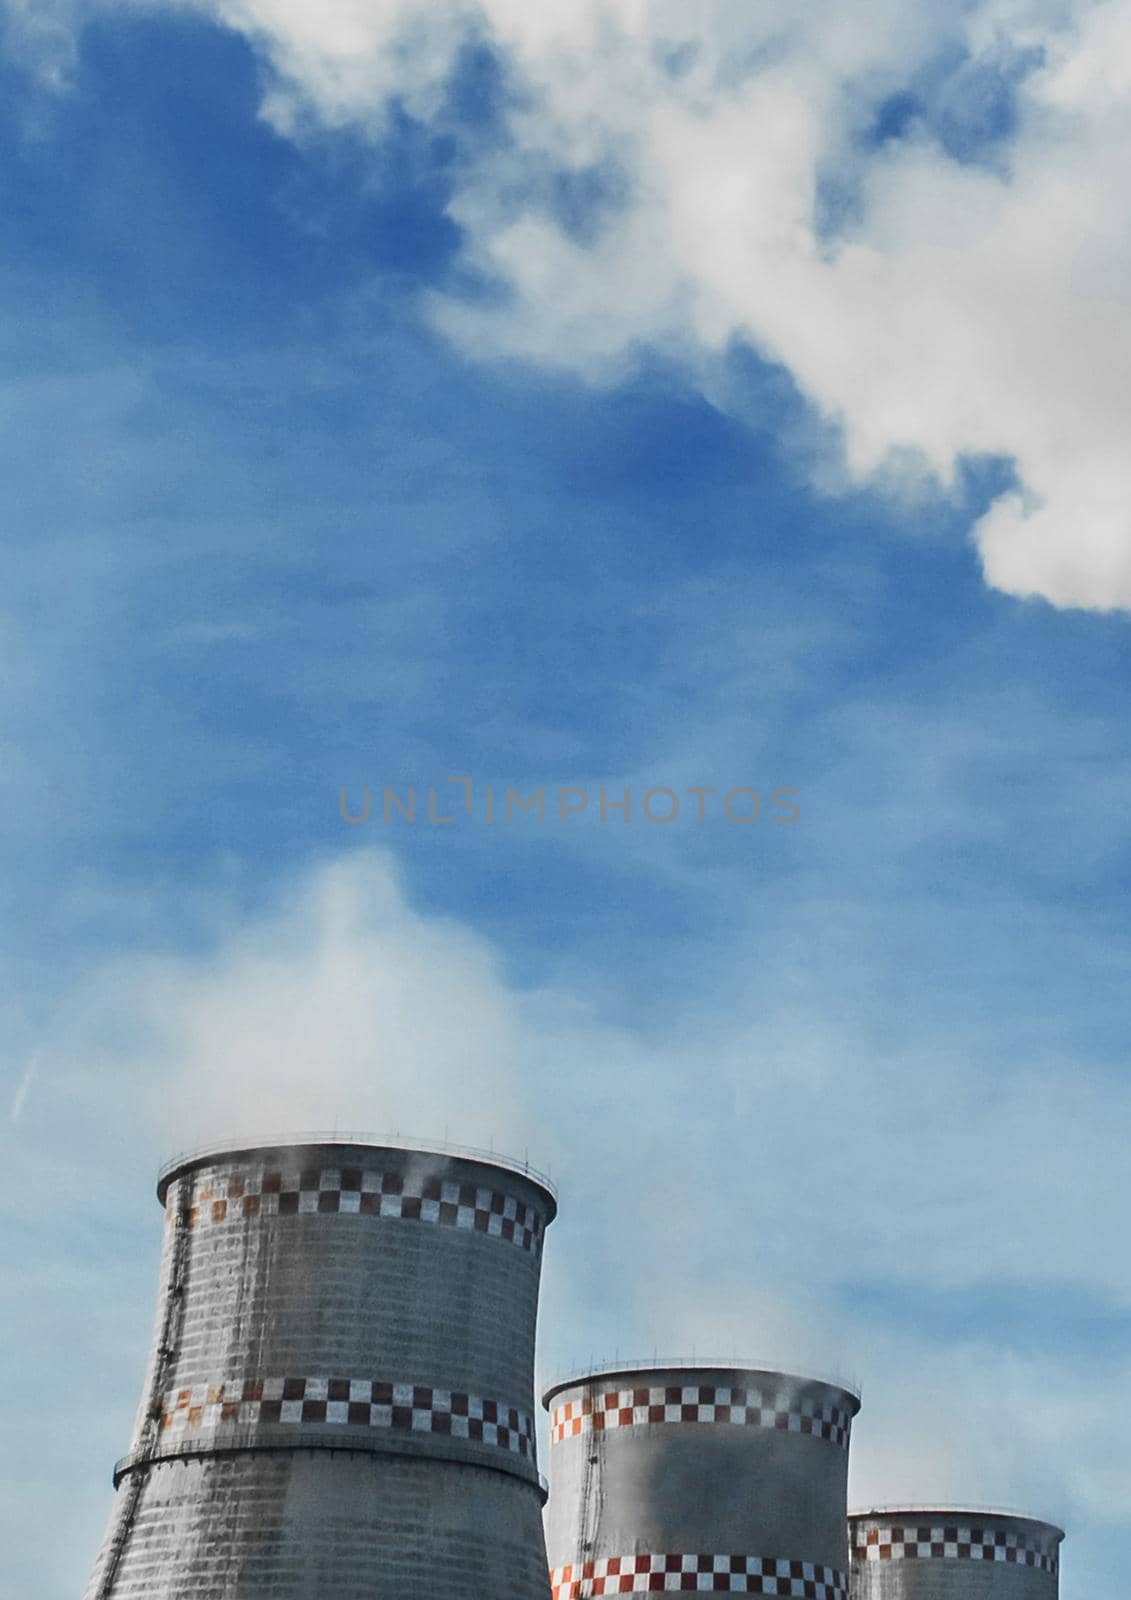 Cooling tower and smoke of an industrial plant or thermal power plant against a blue sky.